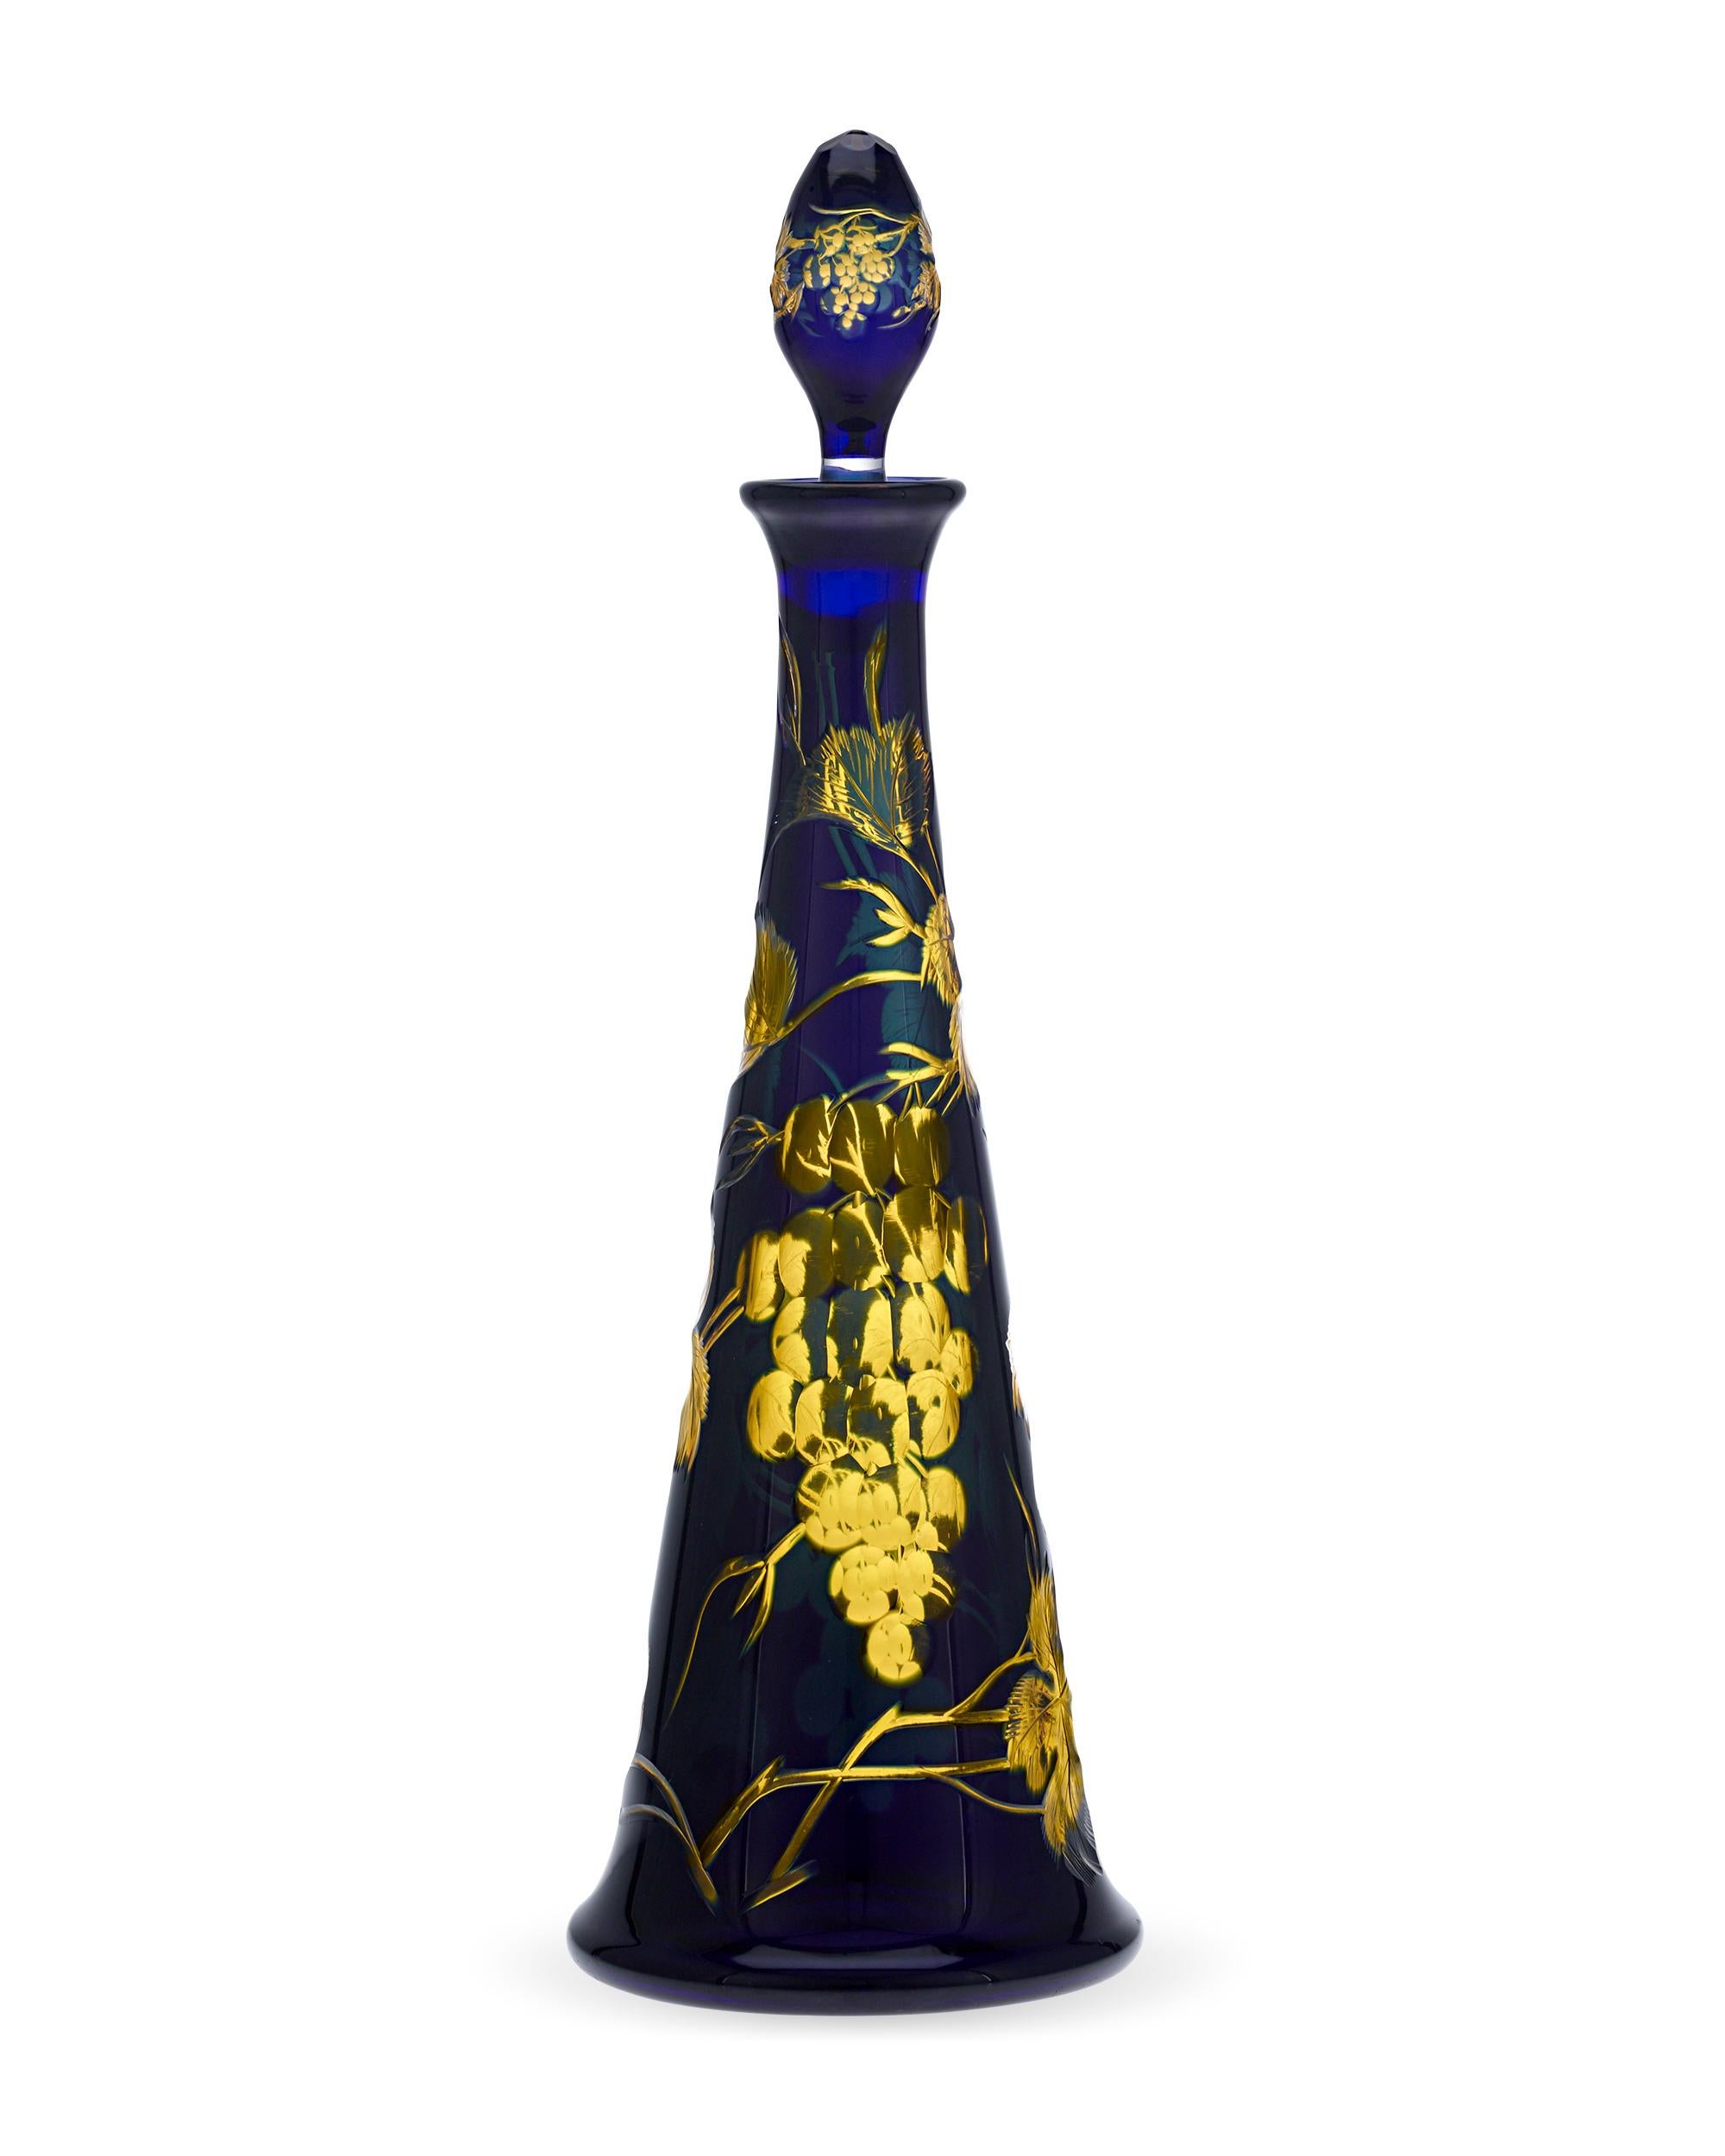 This elegant decanter from celebrated luxury crystal manufacturer Baccarat is a feast for the senses. The interplay of rich yellow and blue cobalt creates a captivating glow from every angle, while the magnificently etched designs of luscious grape